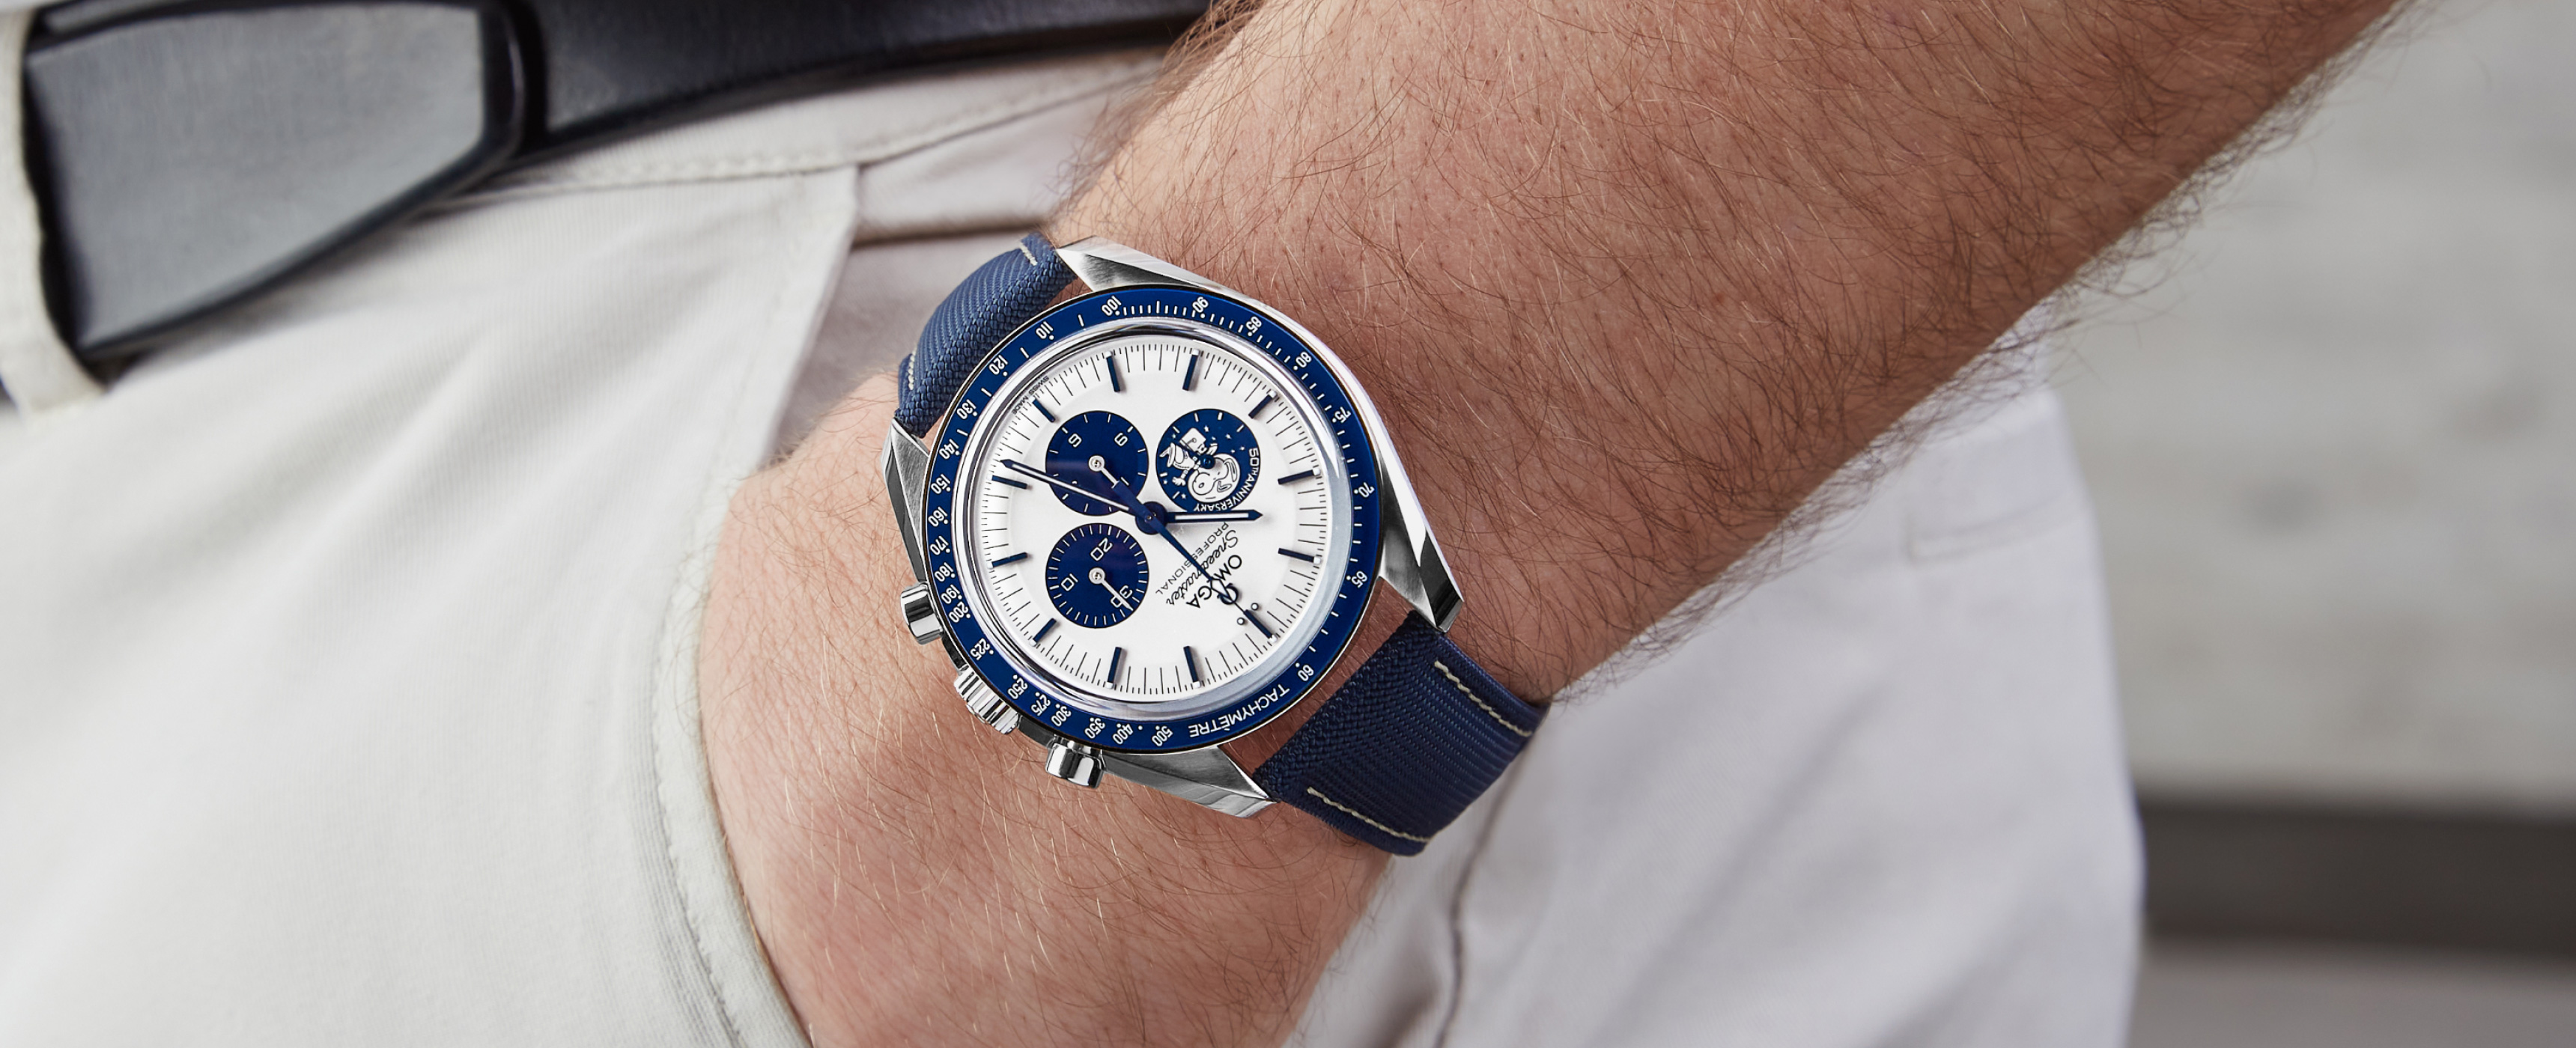 Blue OMEGA watch for a man's wrist